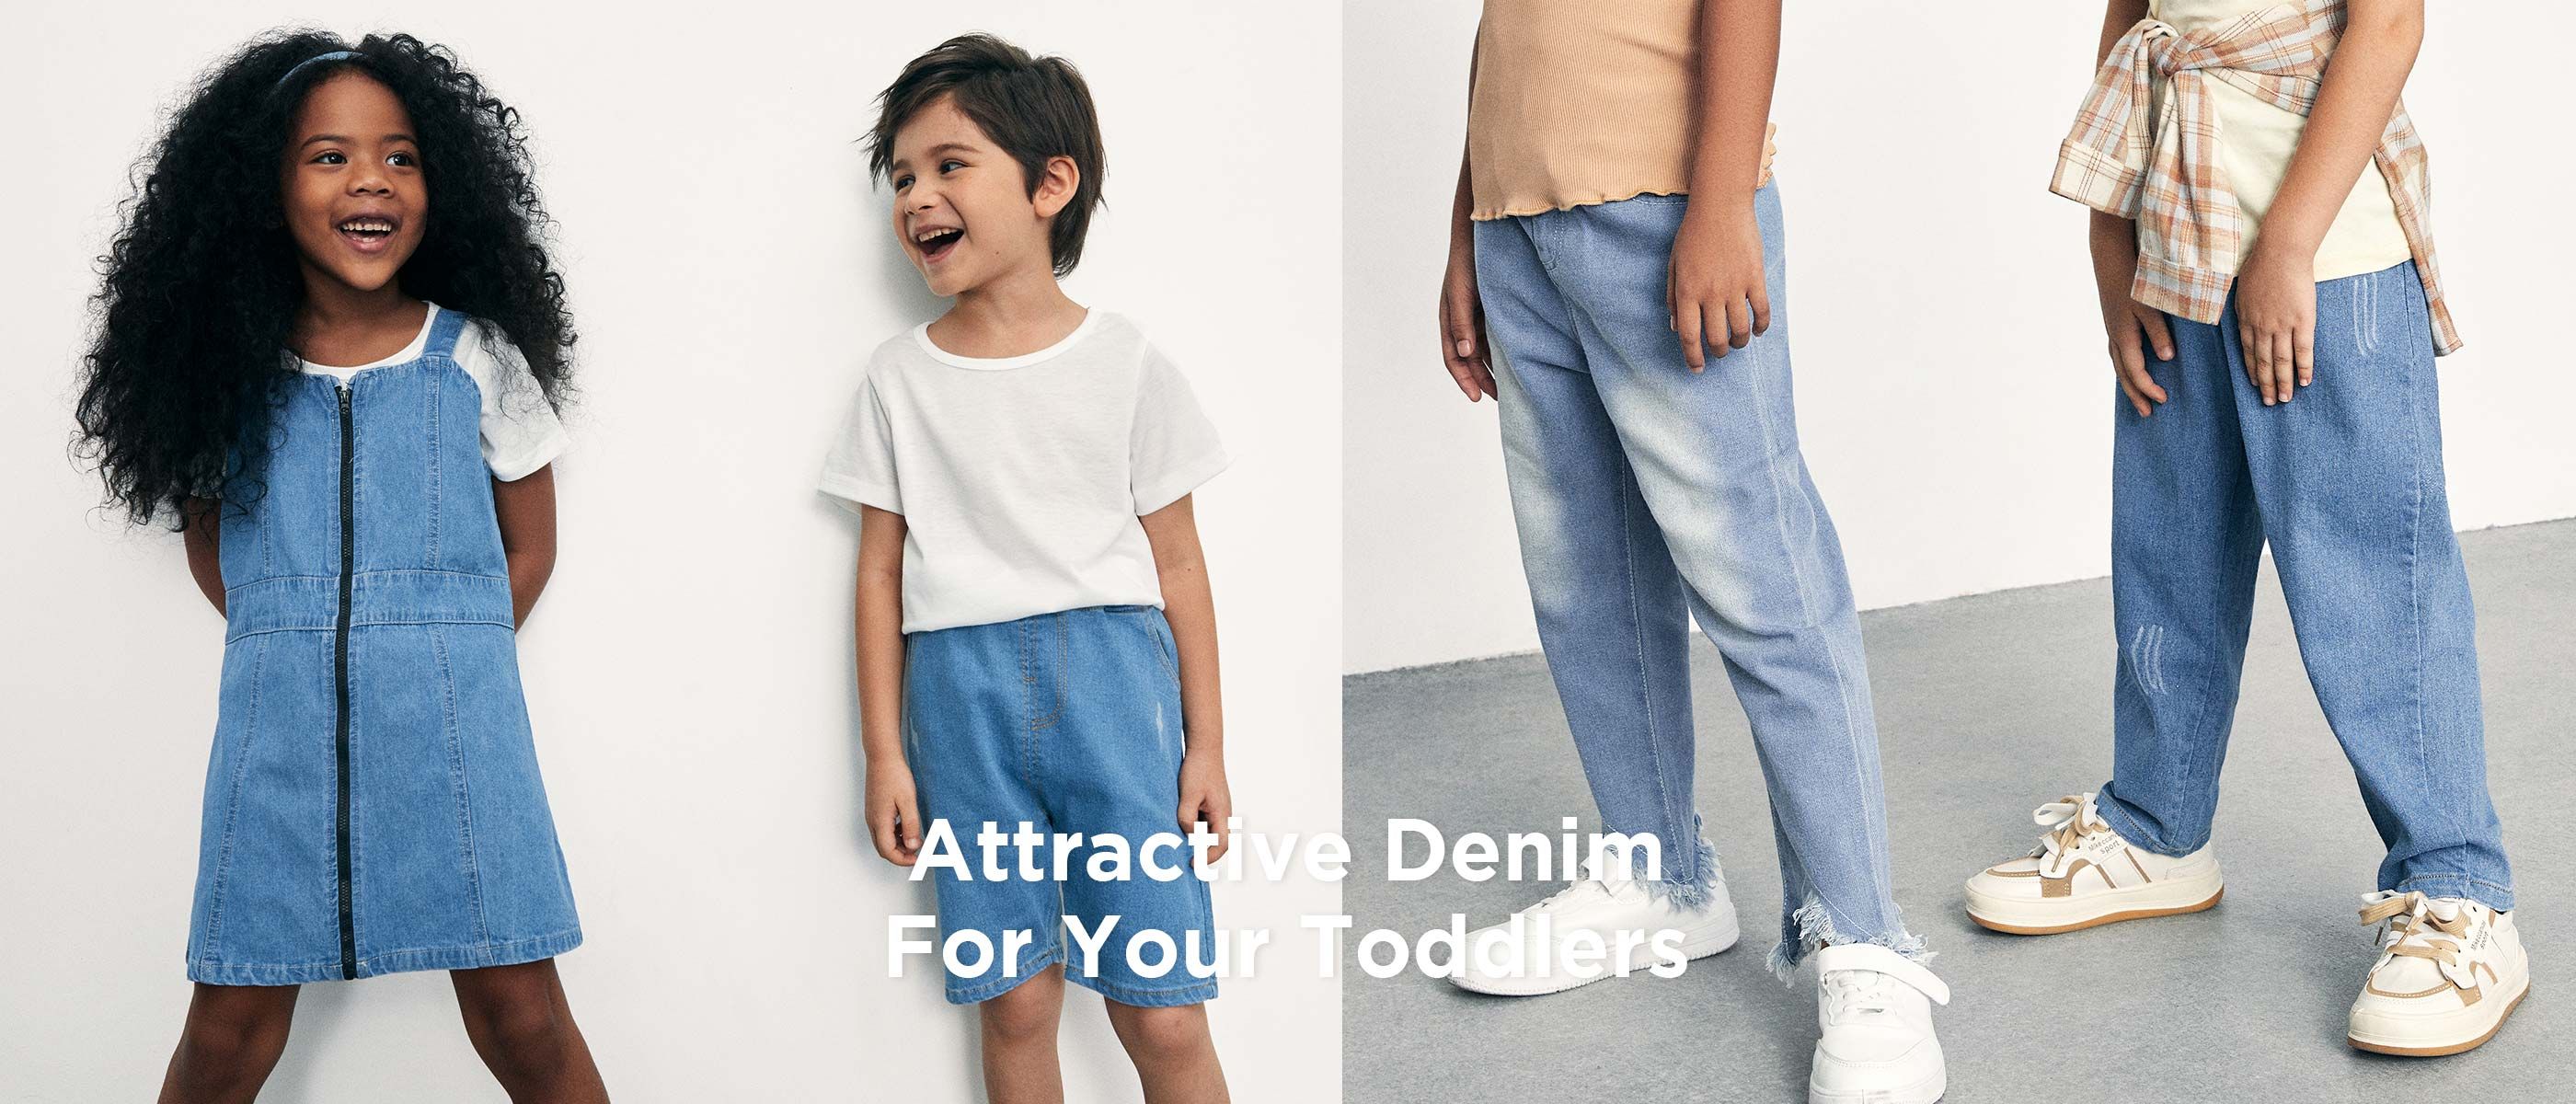 Attractive Denim For Your Toddlers